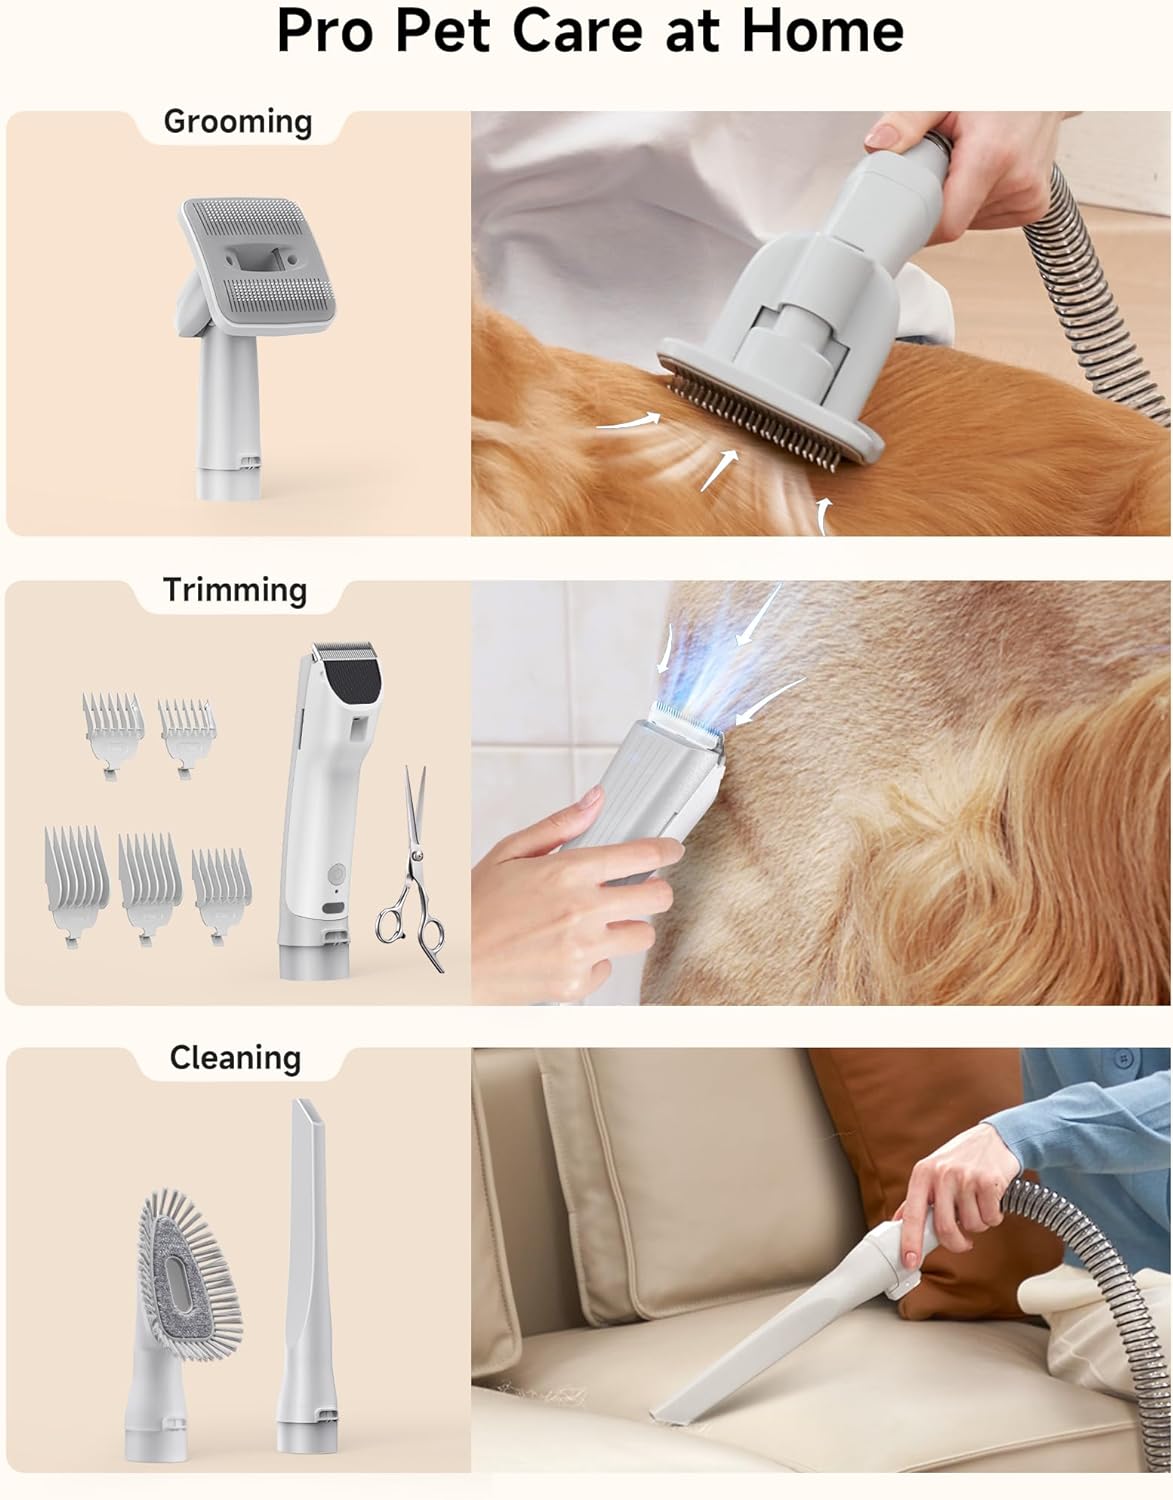 S1+ Pet Grooming Vacuum, Minimum 45dB Pet Friendly Cozy Mode™, 12Kpa Dog Vacuum for Shedding Grooming with 2L Dust Cup, 6 Professional Pet Grooming Tools for Dogs Cats, Gray